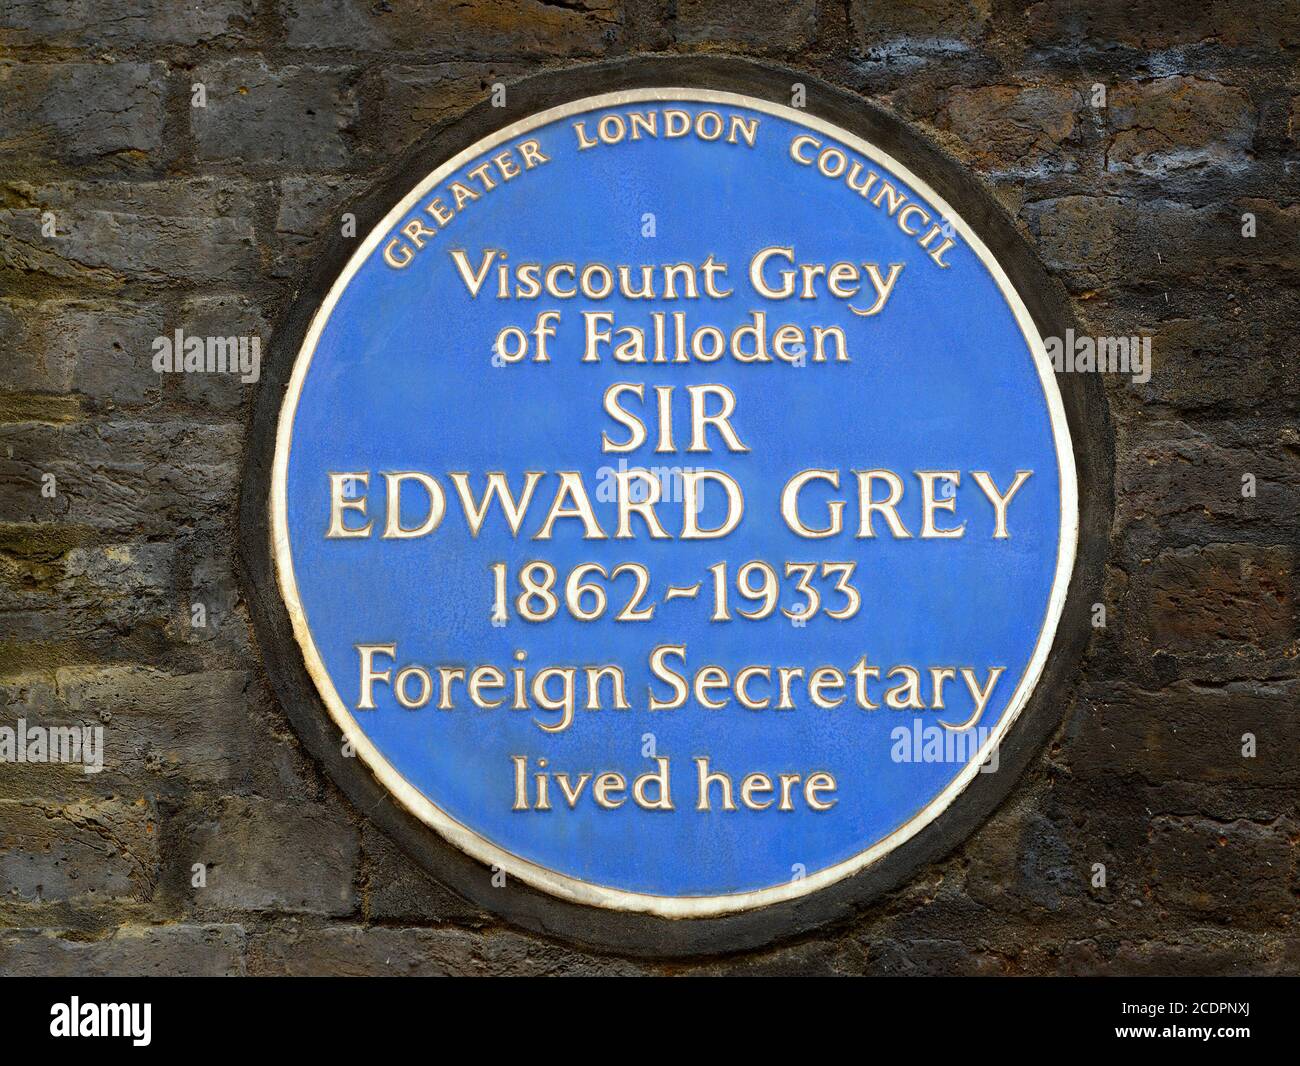 London, England, UK. Commemorative blue plaque: 'Viscount Grey of Falloden Sir Edward Grey 1862-1933 Foreign Secretary lived here' at 8 Queen Anne's G Stock Photo